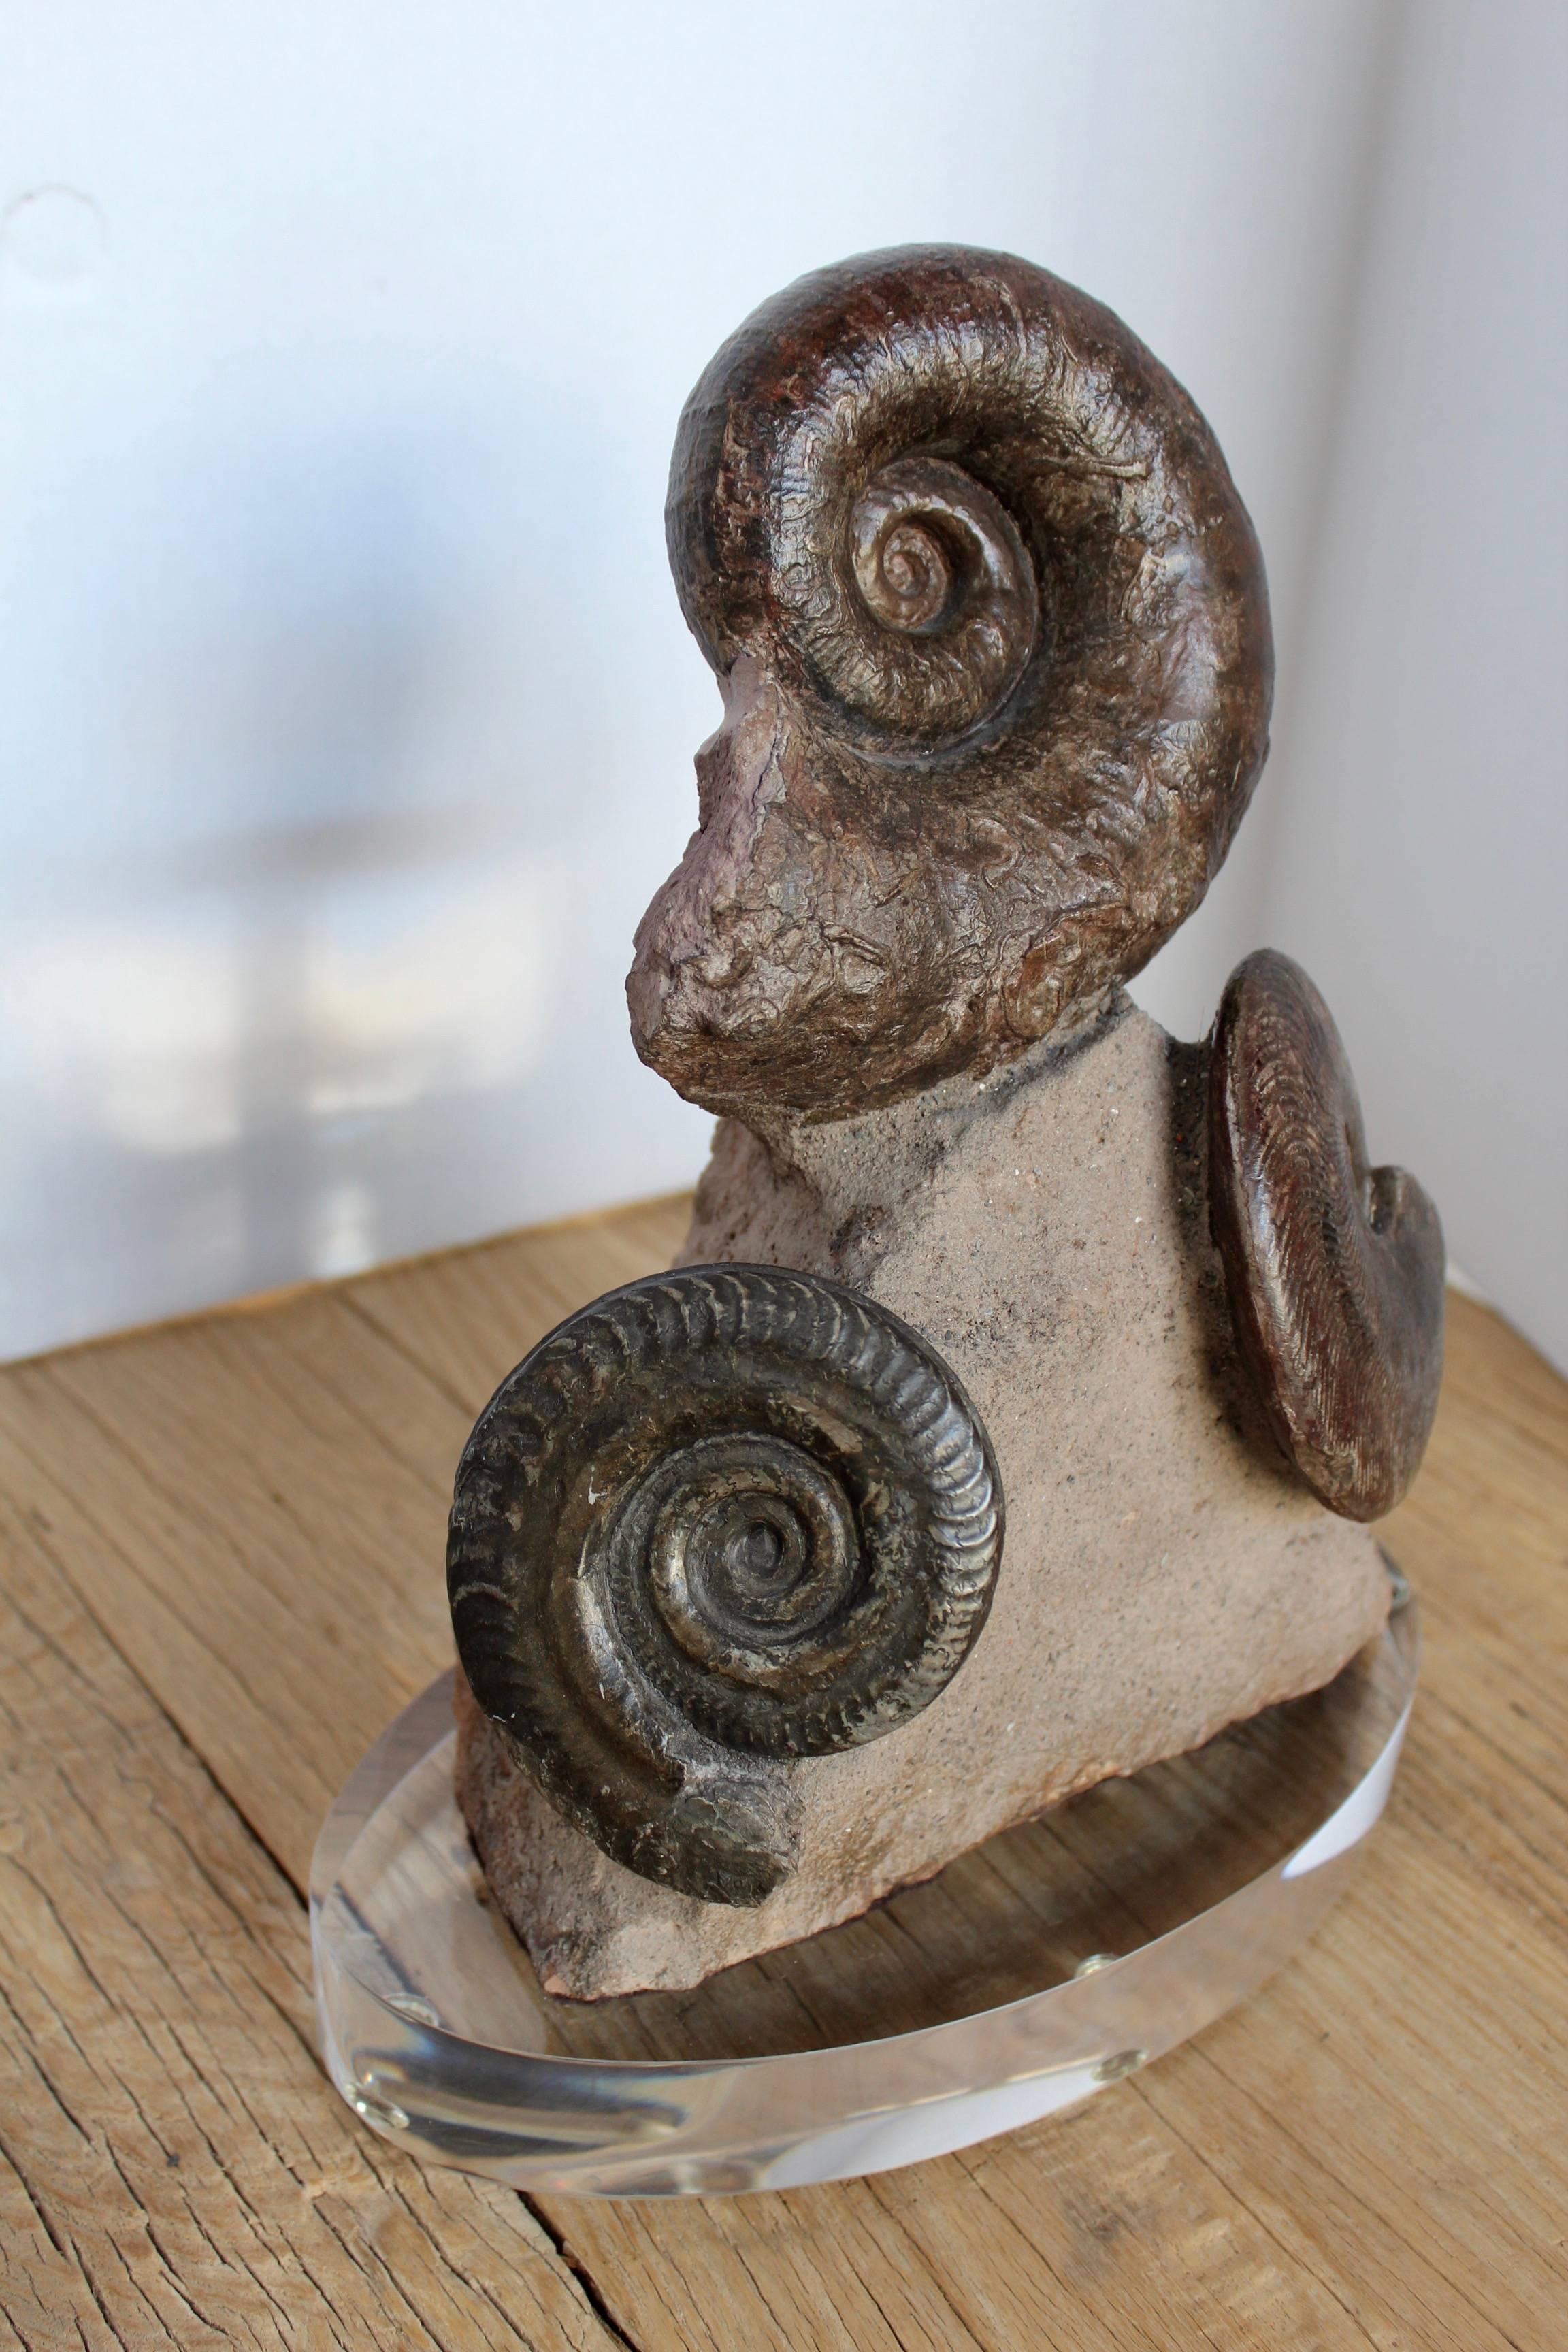 Prehistoric fossil ammonite decorative accessory.
Chiseled out of their natural limestone rock to show the depth of this prehistoric fossil as a decorative item piece on oval acrylic base. 

Ammonites ruled the oceans for 370 million years before